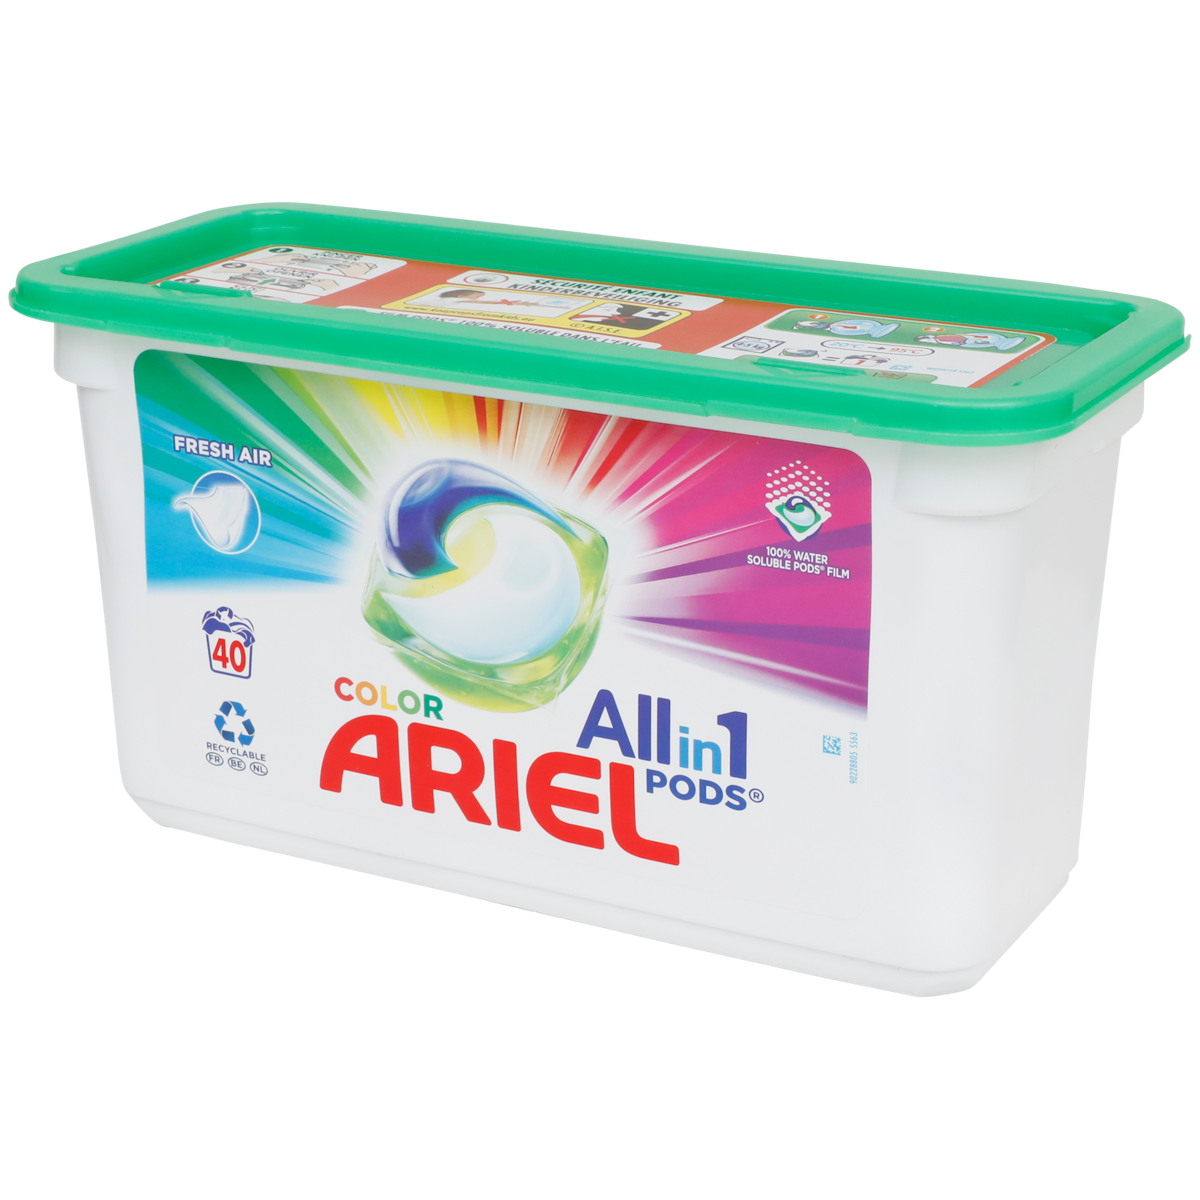 Ariel All-in-1 pods Color